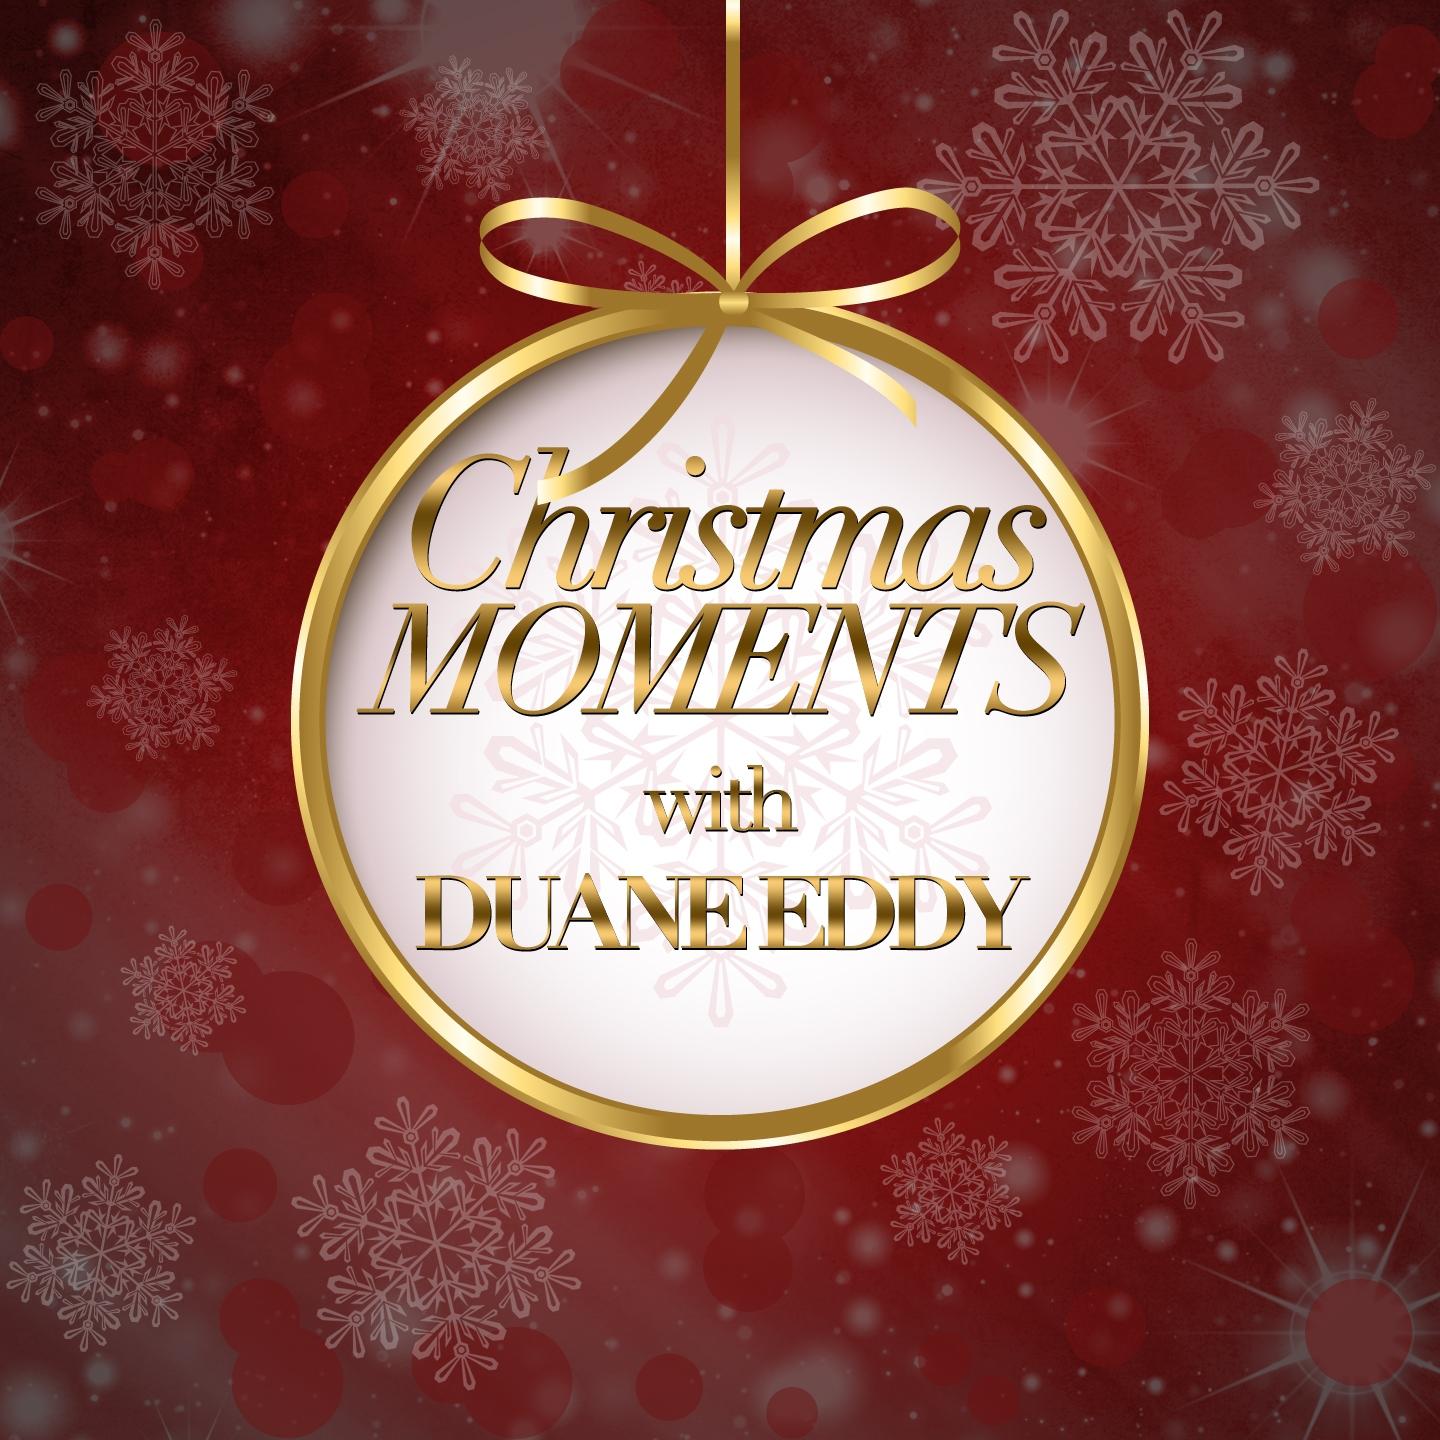 Christmas Moments with Duane Eddy